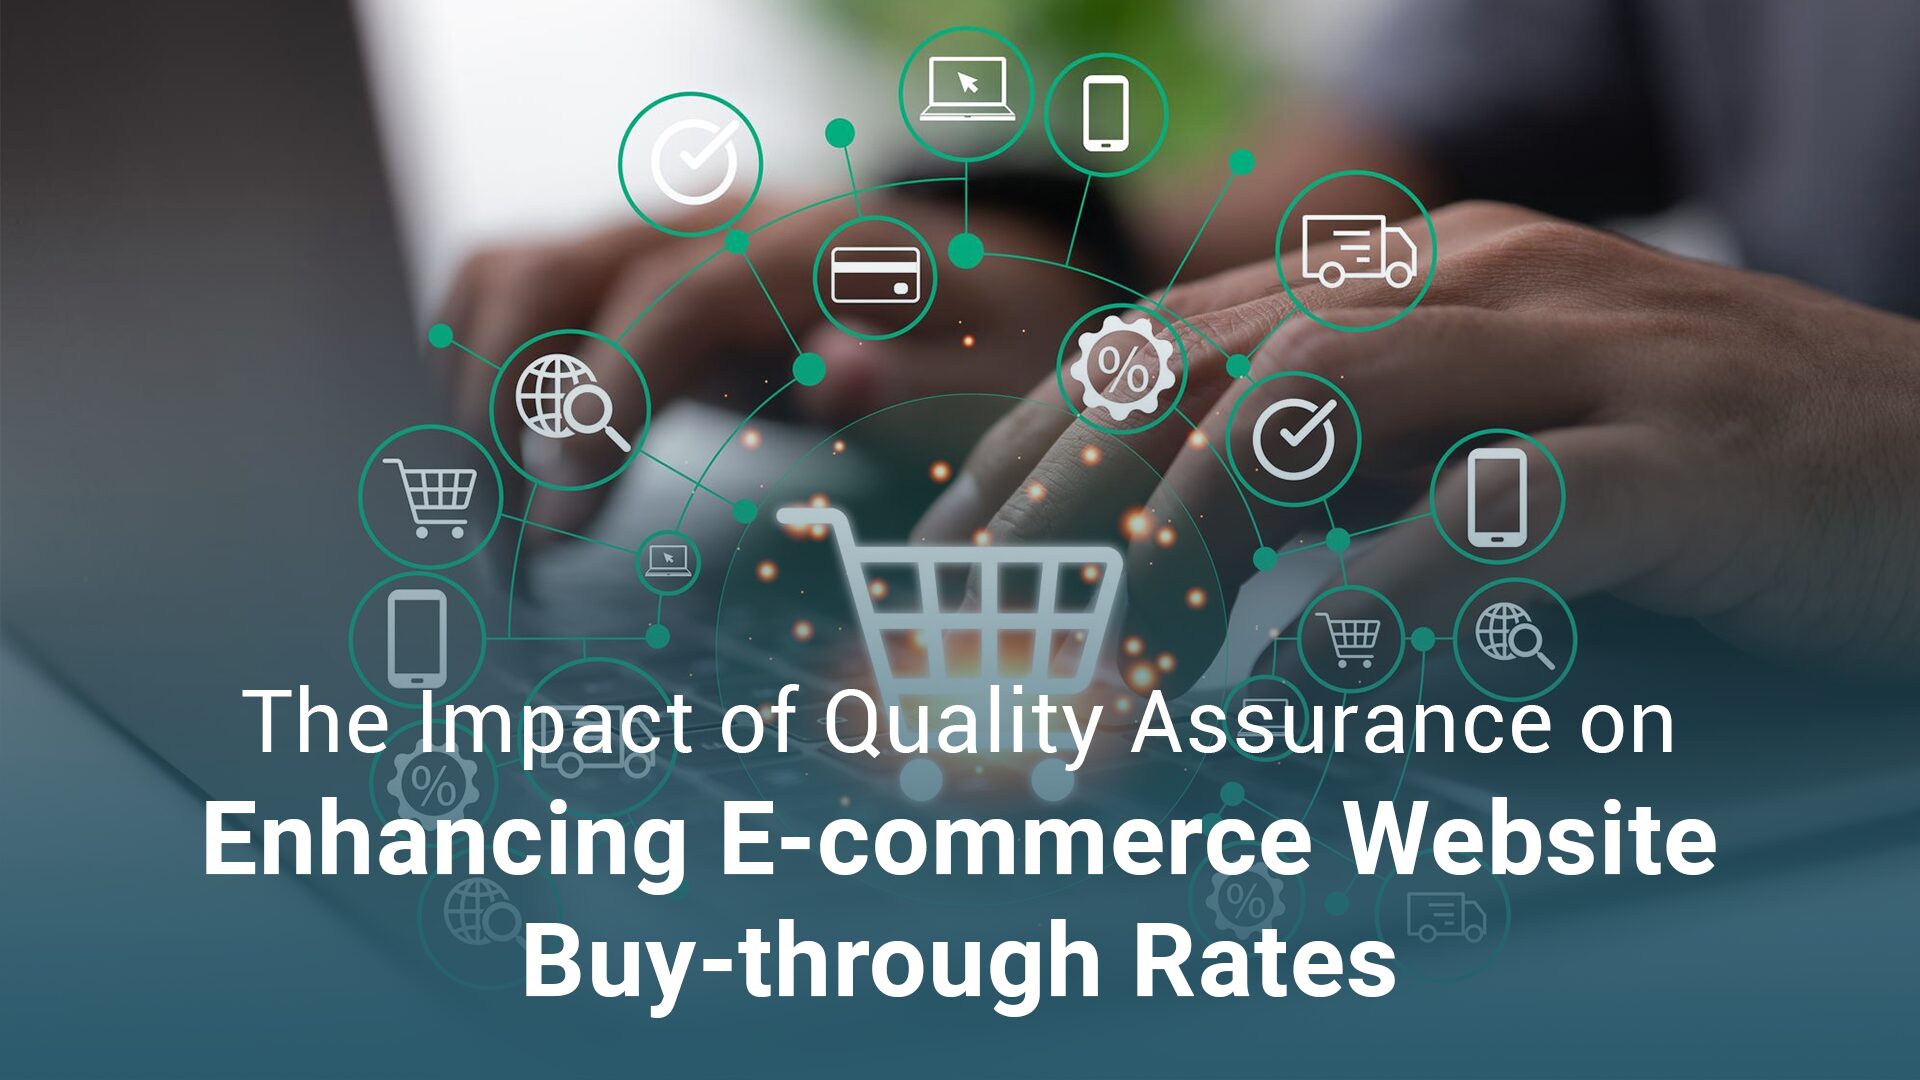 The Impact of Quality Assurance on Enhancing E-commerce Website Buy-through Rates